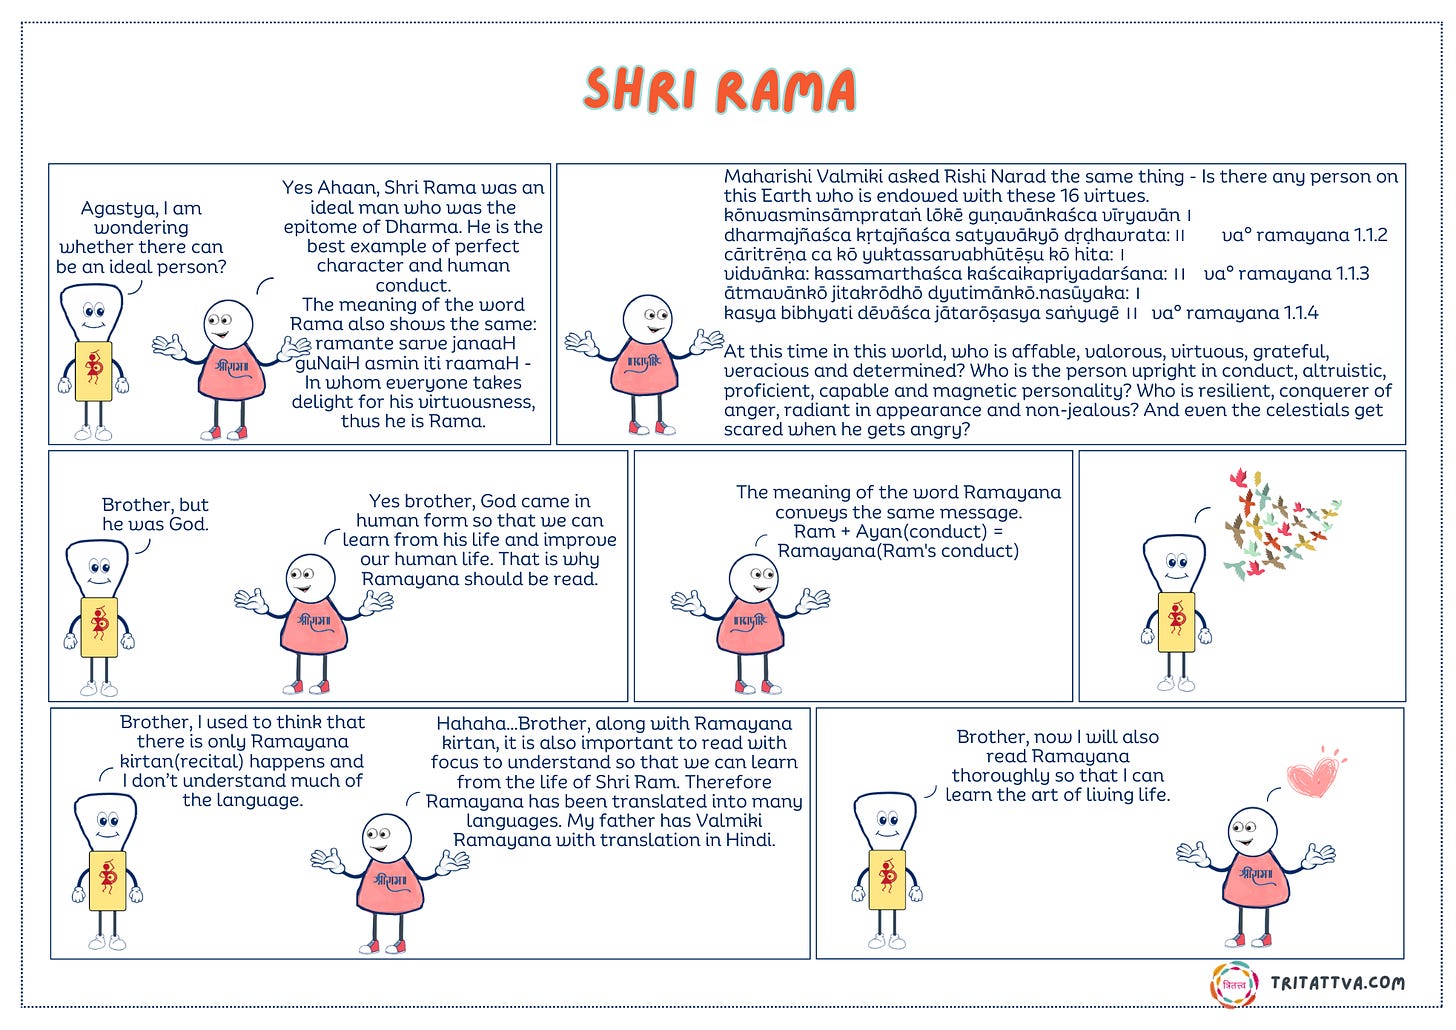 TriTattva web comic strip talks about Shri Rama and inspires us to live a life with righteousness as mentioned in Bharat's epic Valmiki Ramayana.